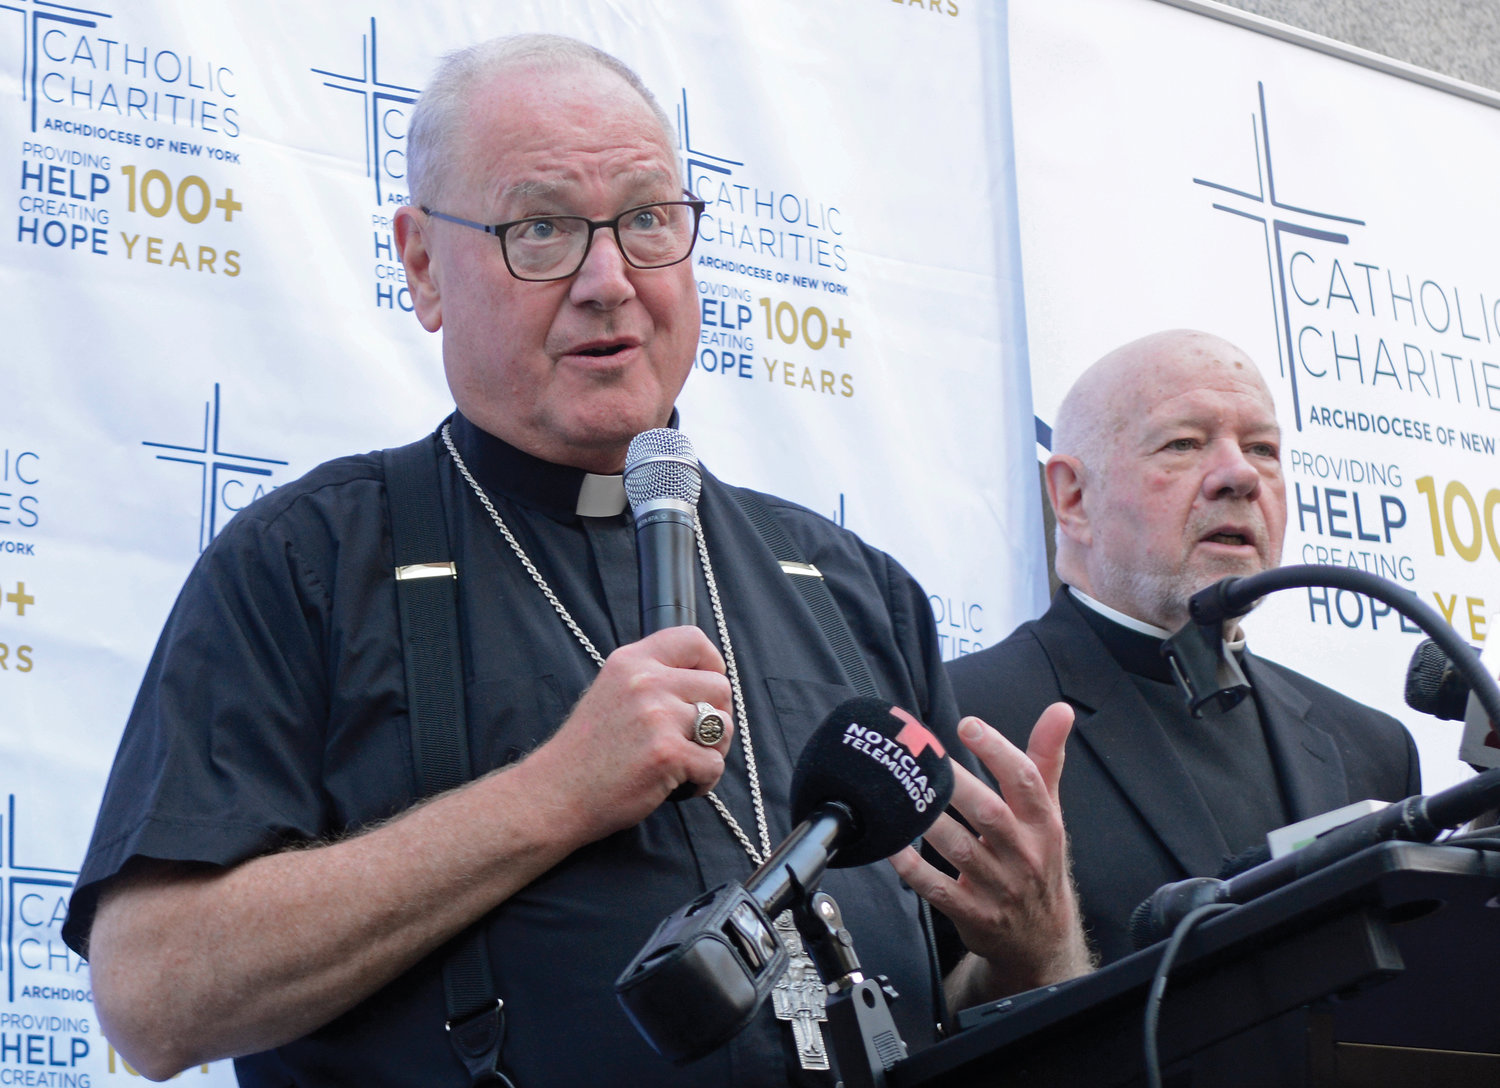 The cardinal, Msgr. Kevin Sullivan and others held a media briefing outside the center.